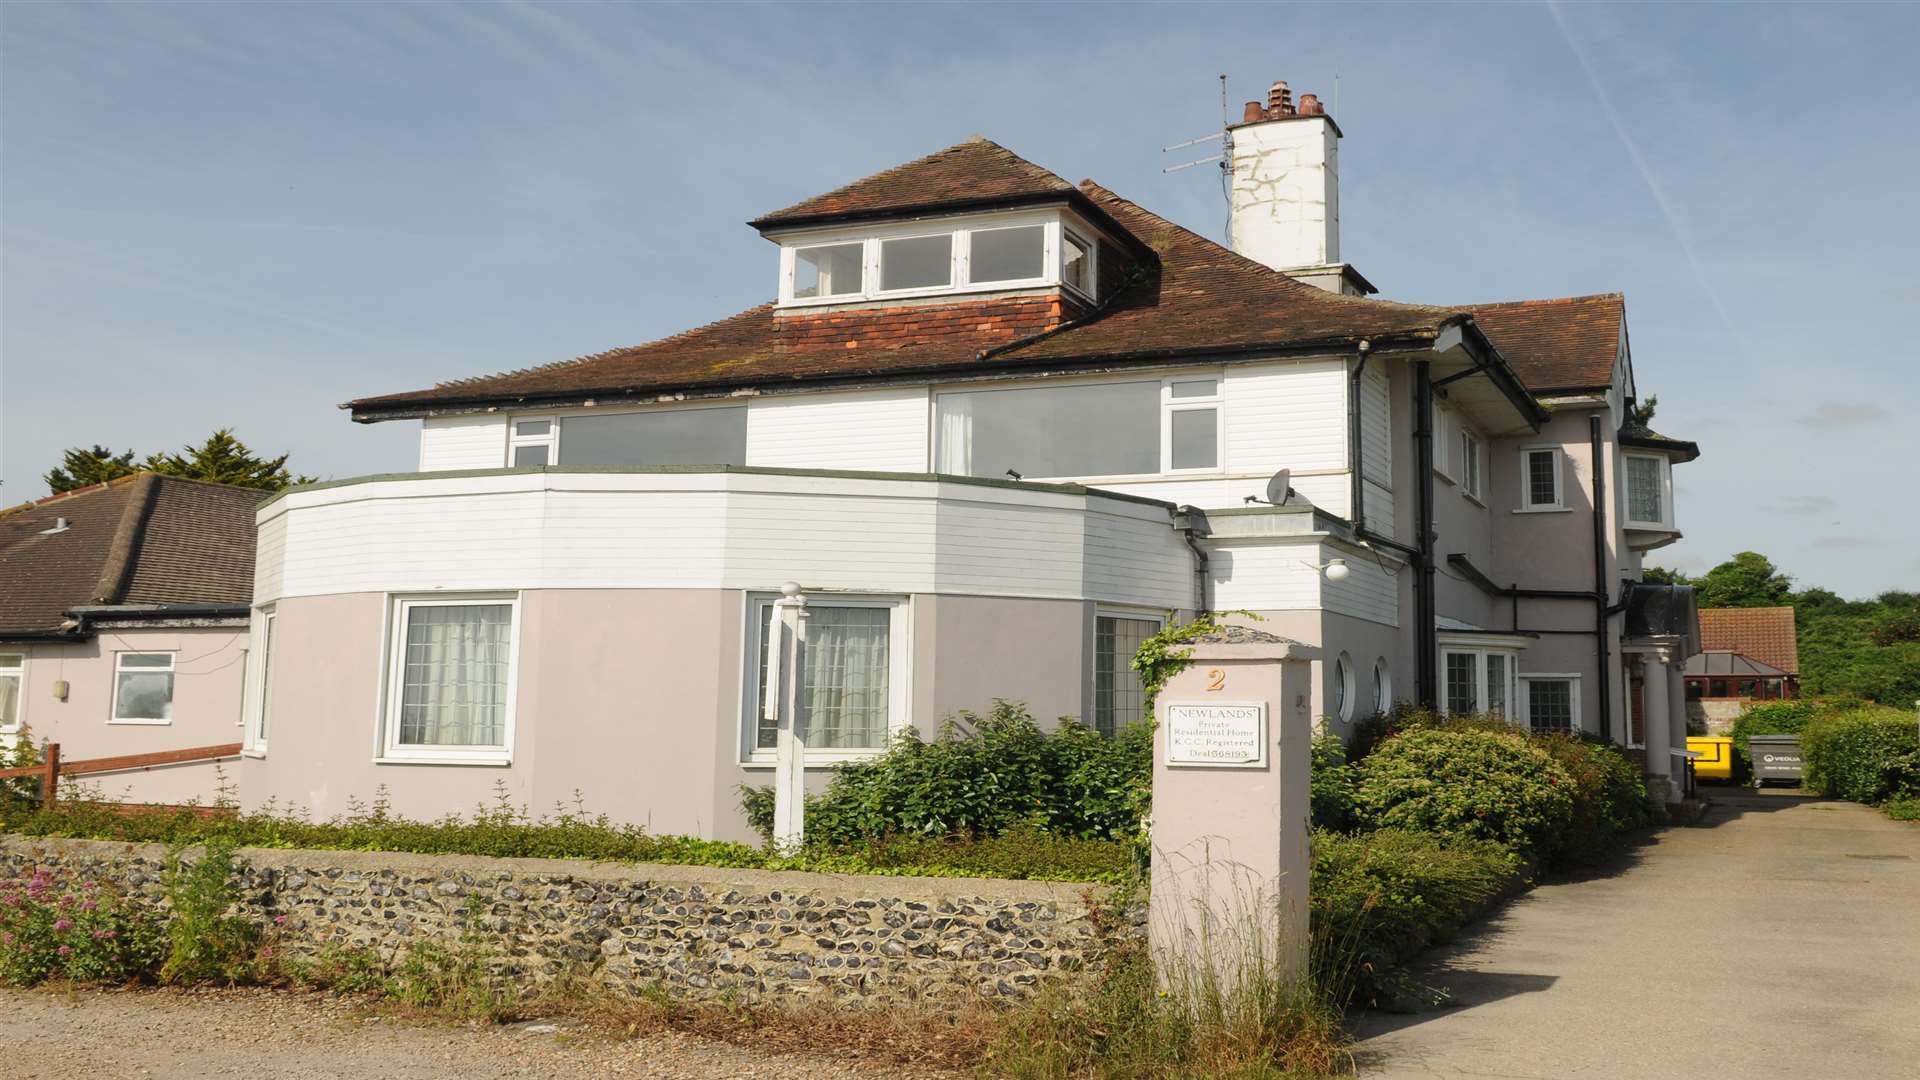 Newlands residential home, Walmer, which has been placed in special measures. Picture: Wayne McCabe